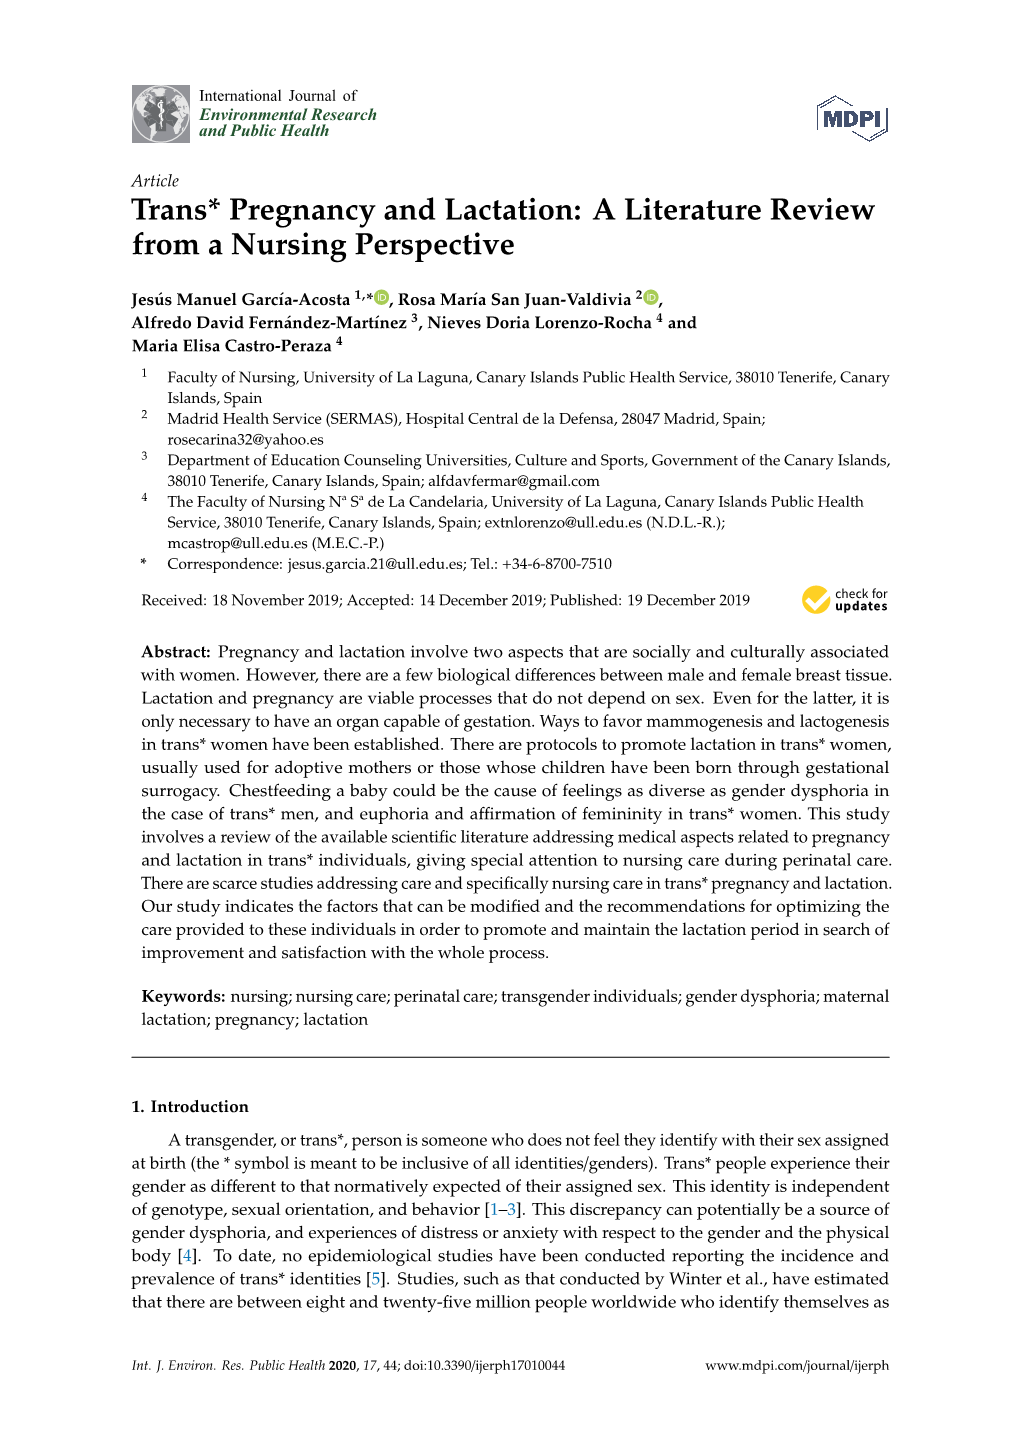 Trans* Pregnancy and Lactation: a Literature Review from a Nursing Perspective